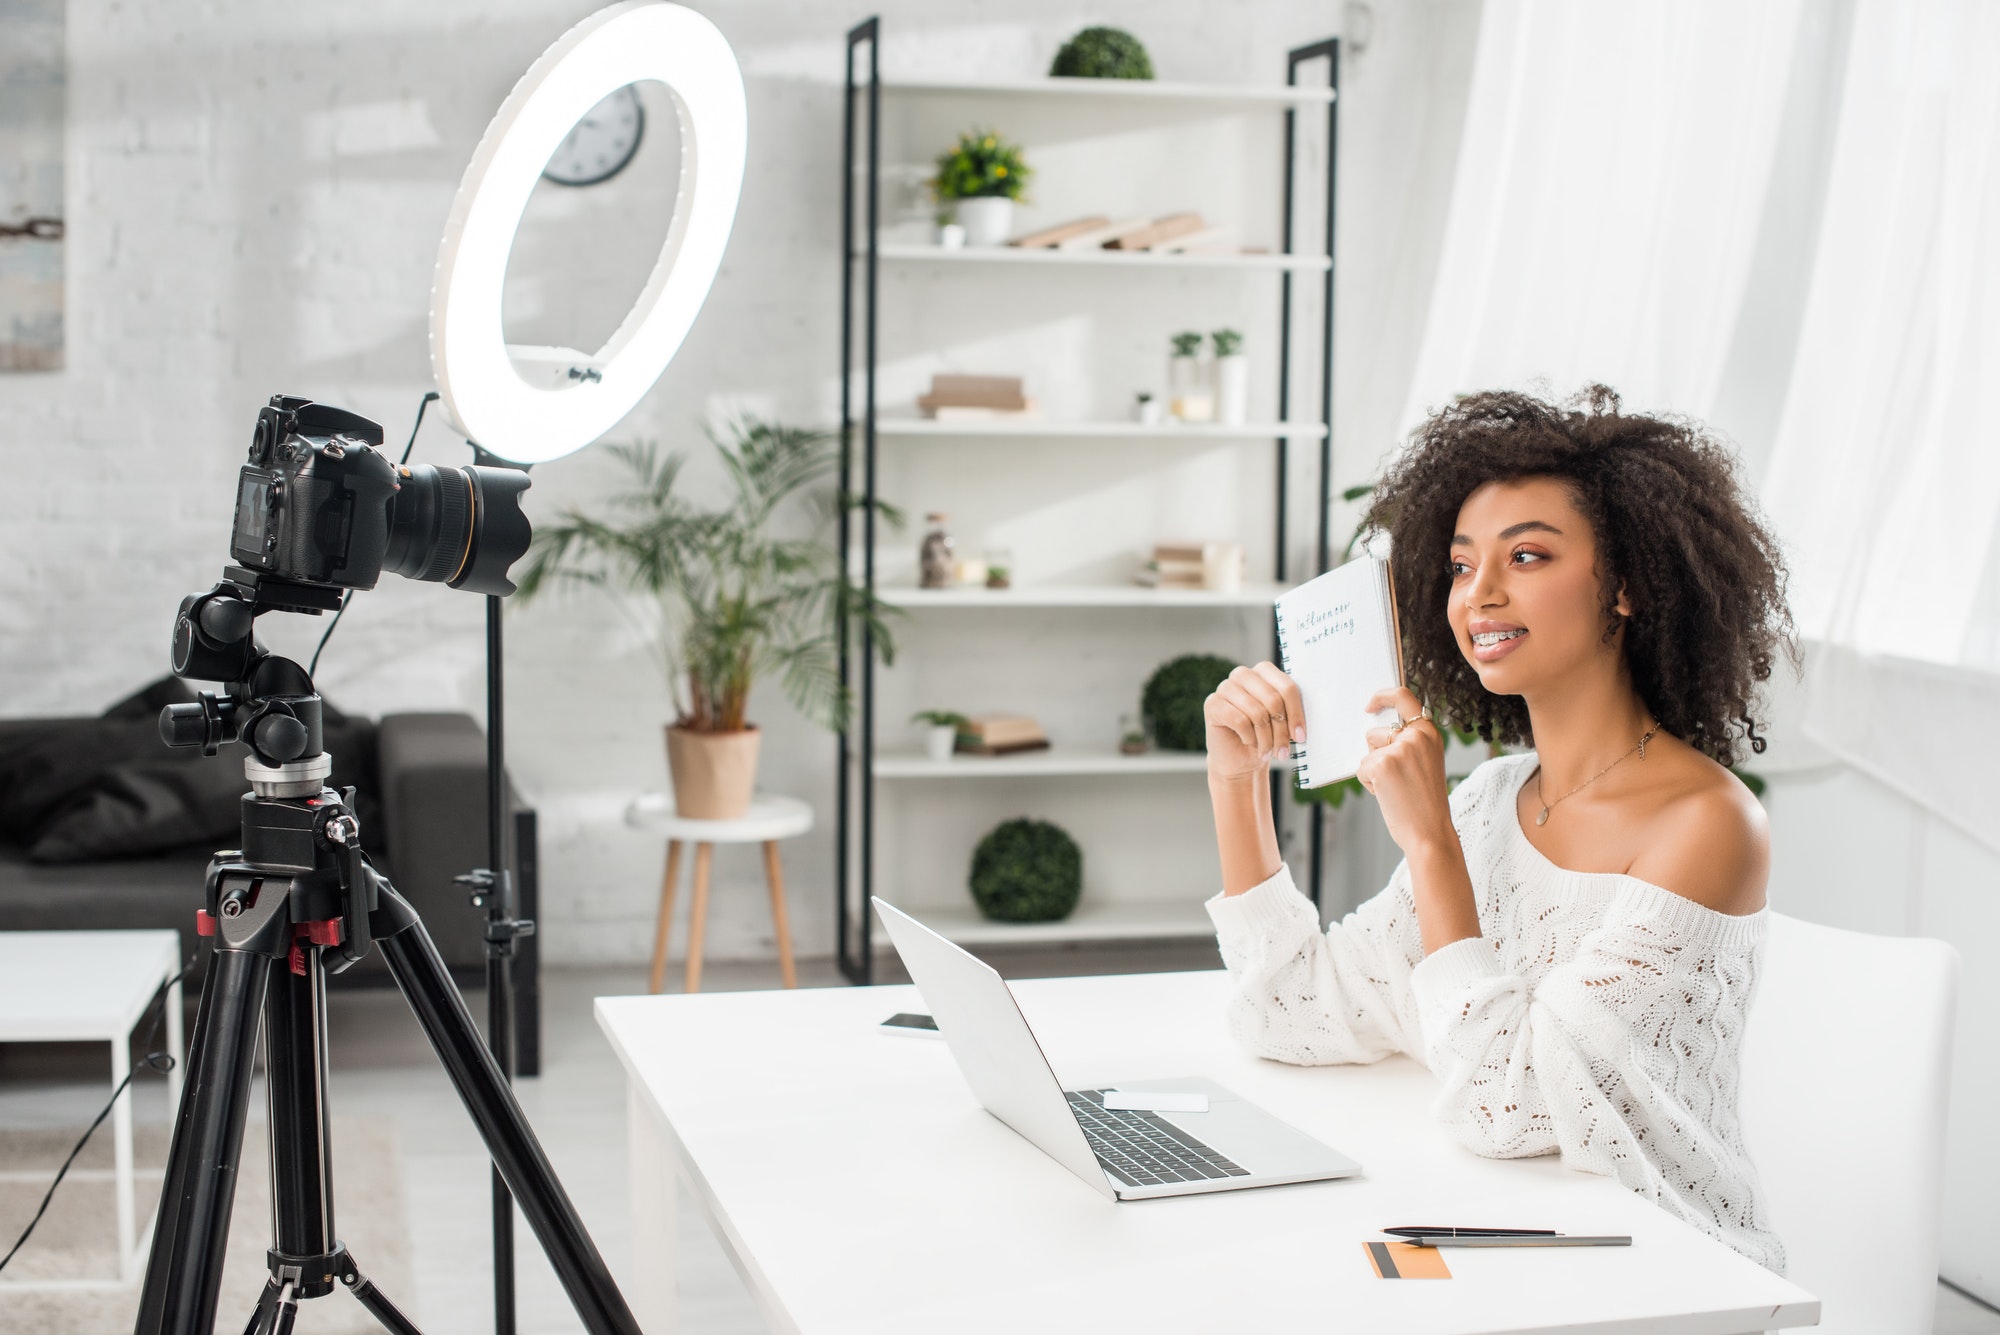 Quick Guide to Get Started with Video Marketing